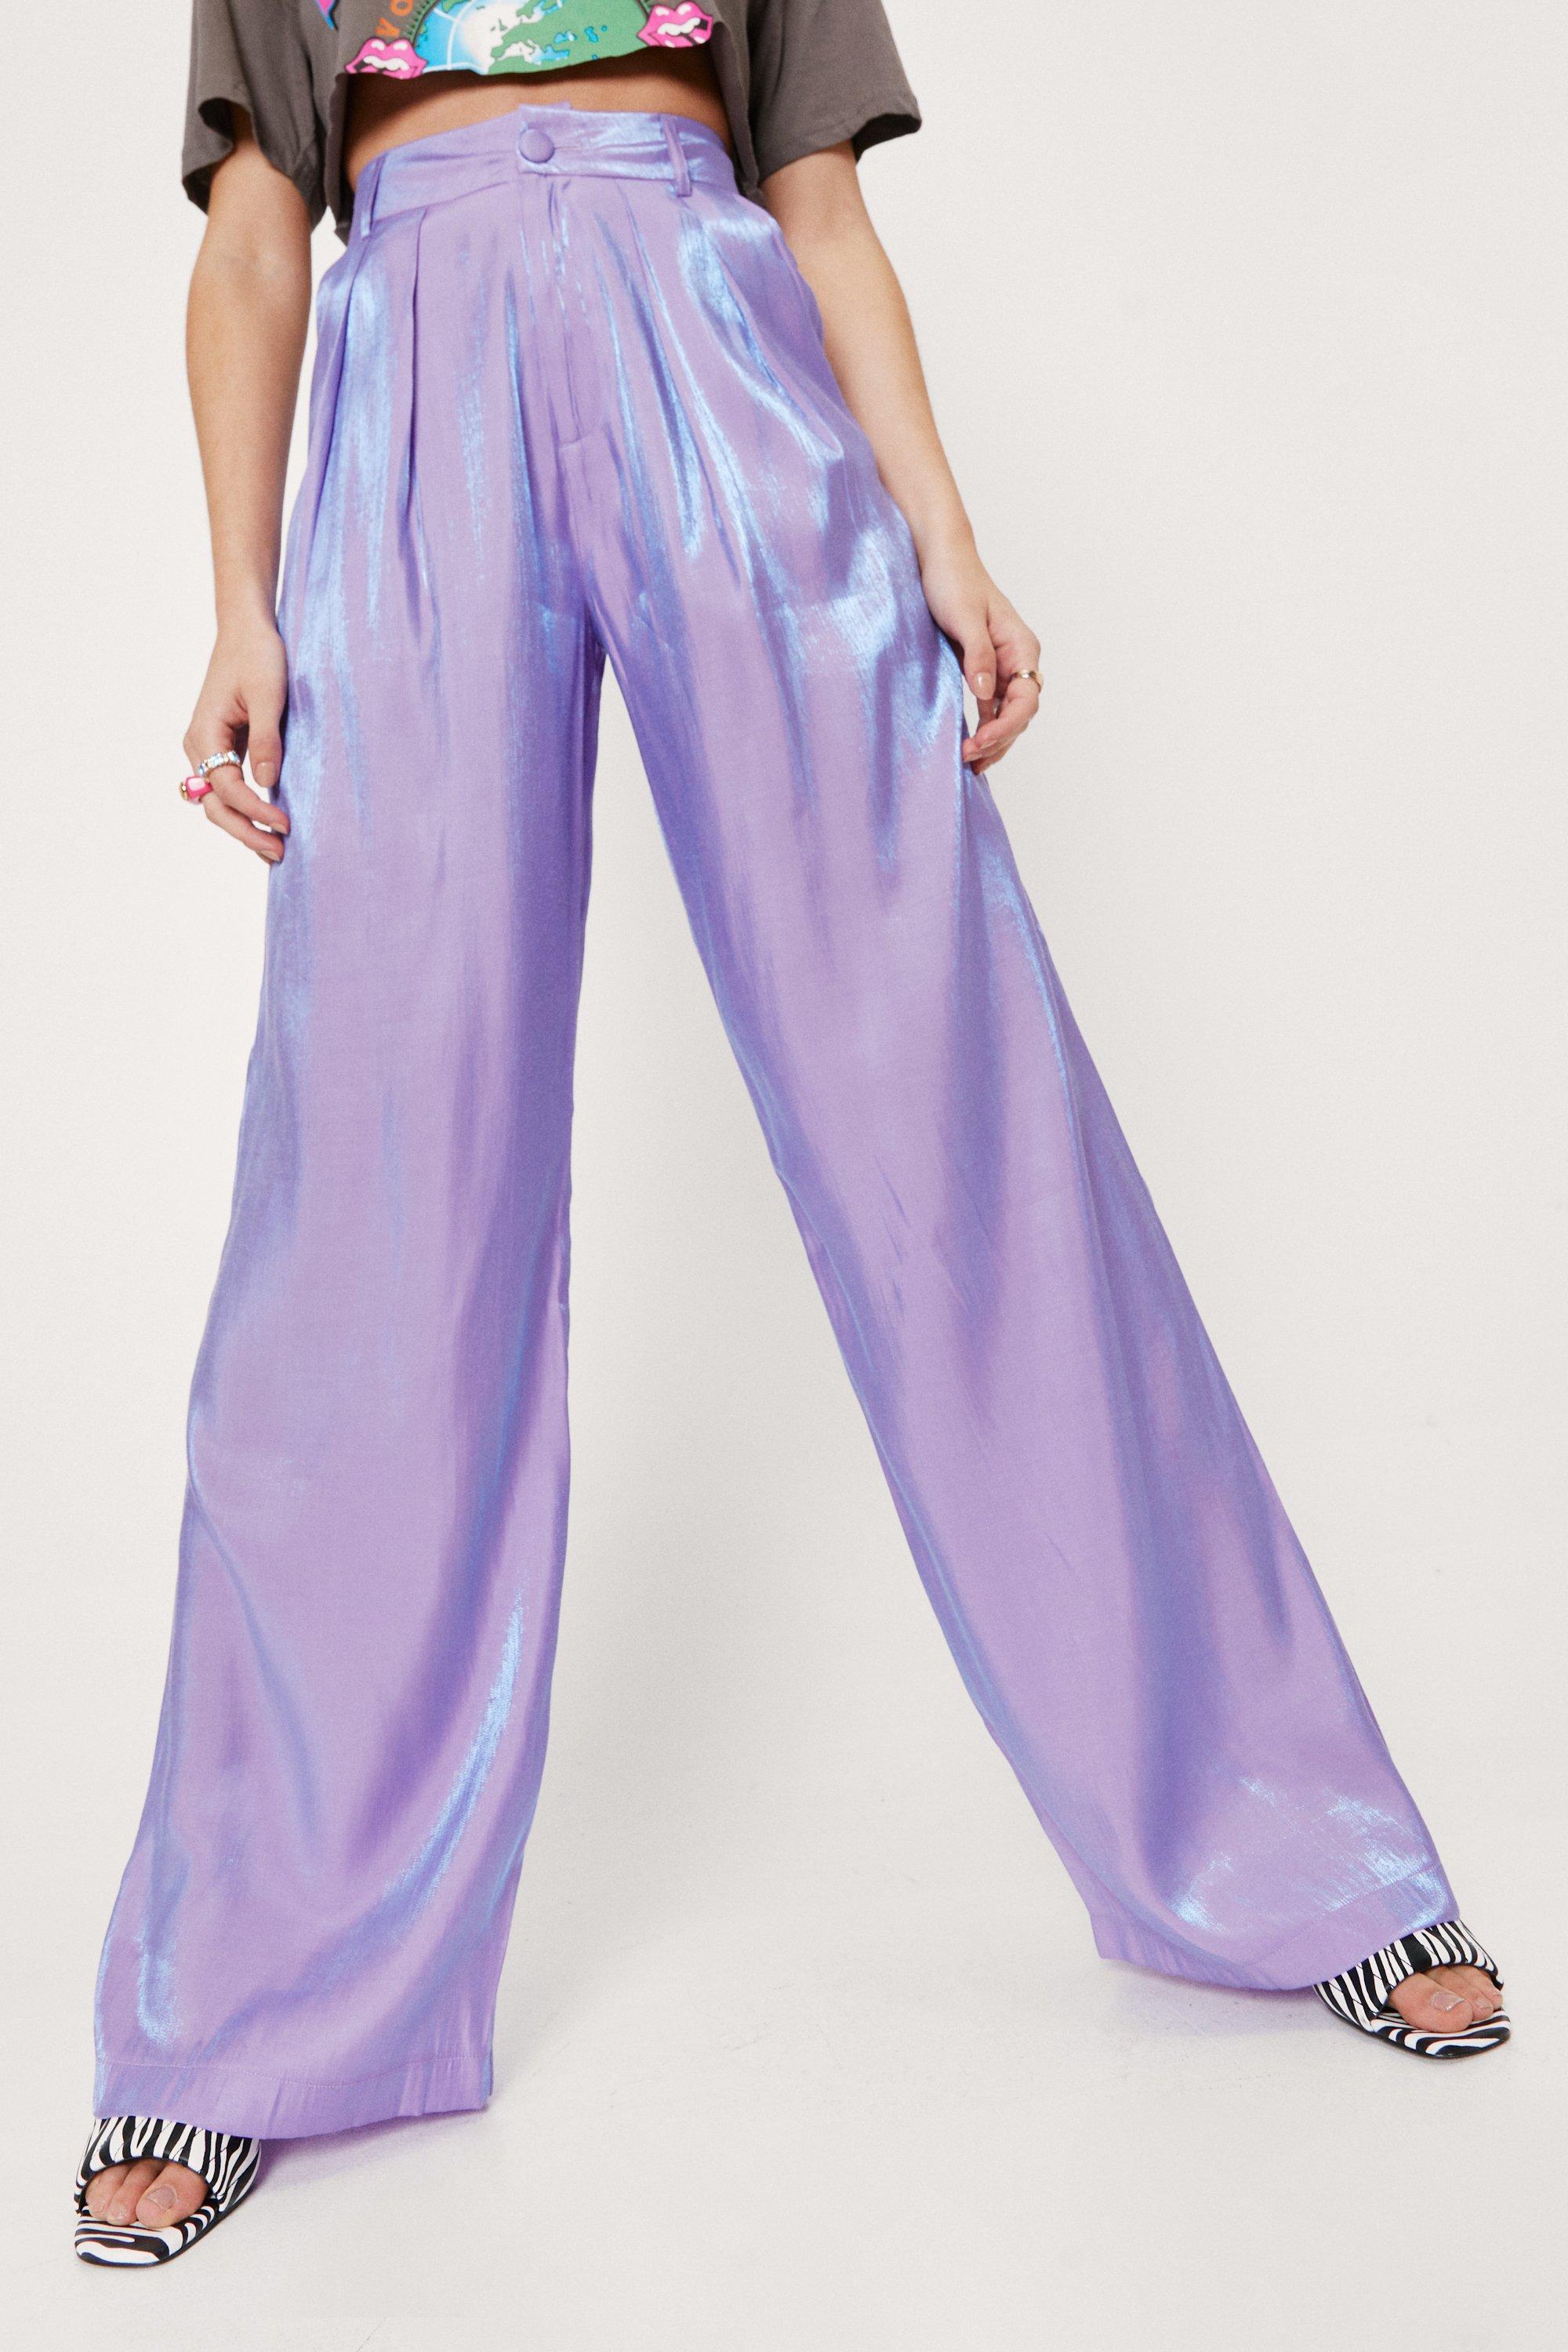 Purple Chic Pleated Women Palazzo Pant High Waist Floor-Length Wide Leg  Pants 2022 New Ladies Casual Loose Pocket Trousers - AliExpress